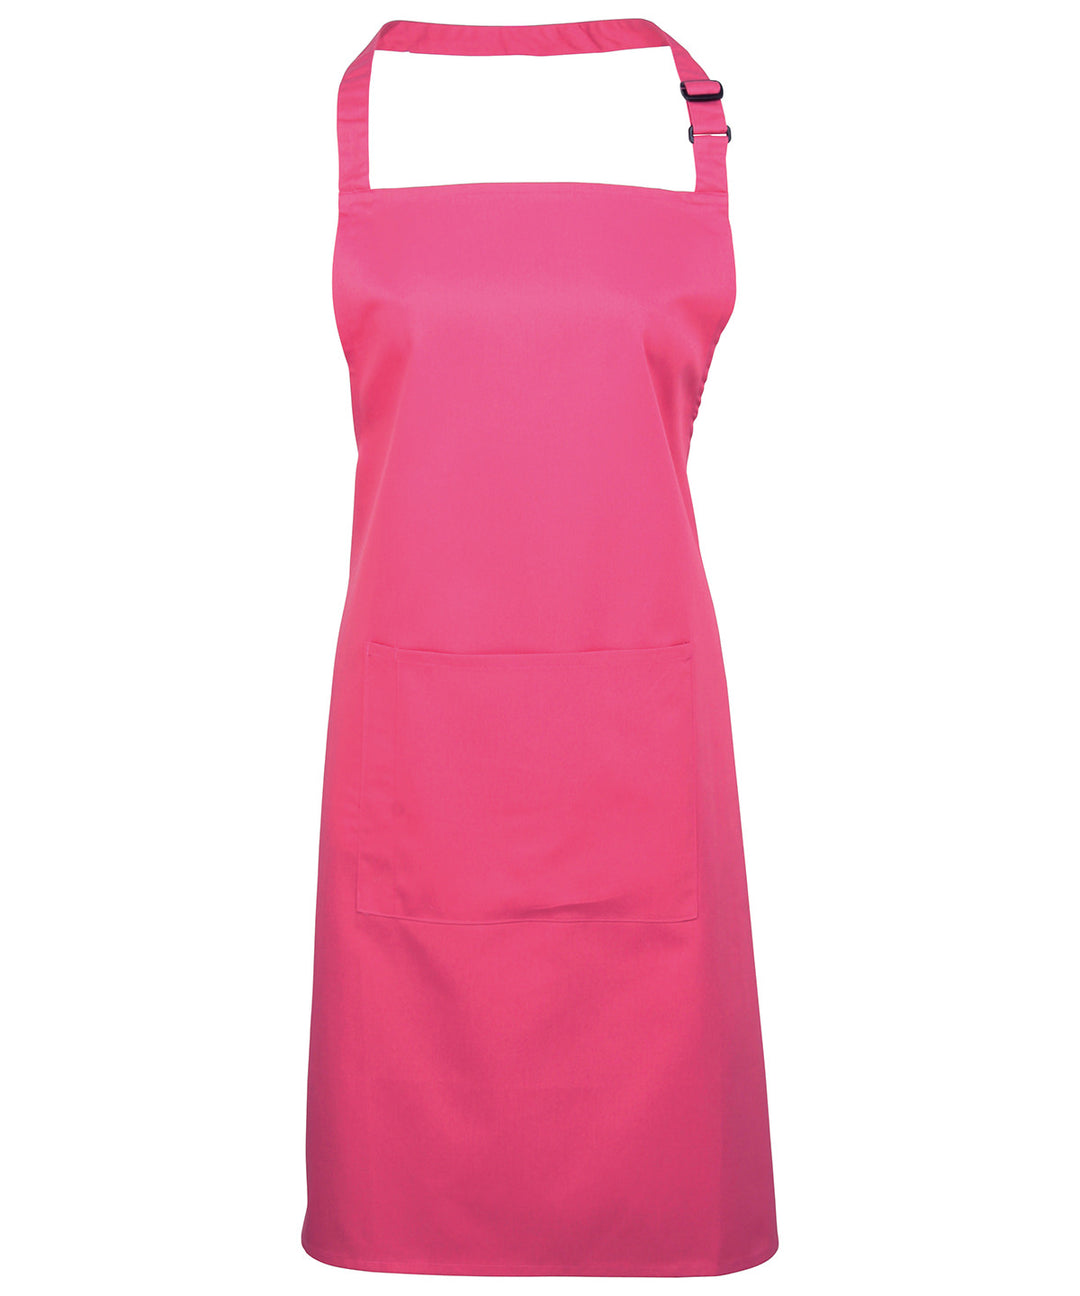 a pink apron with straps on a white background